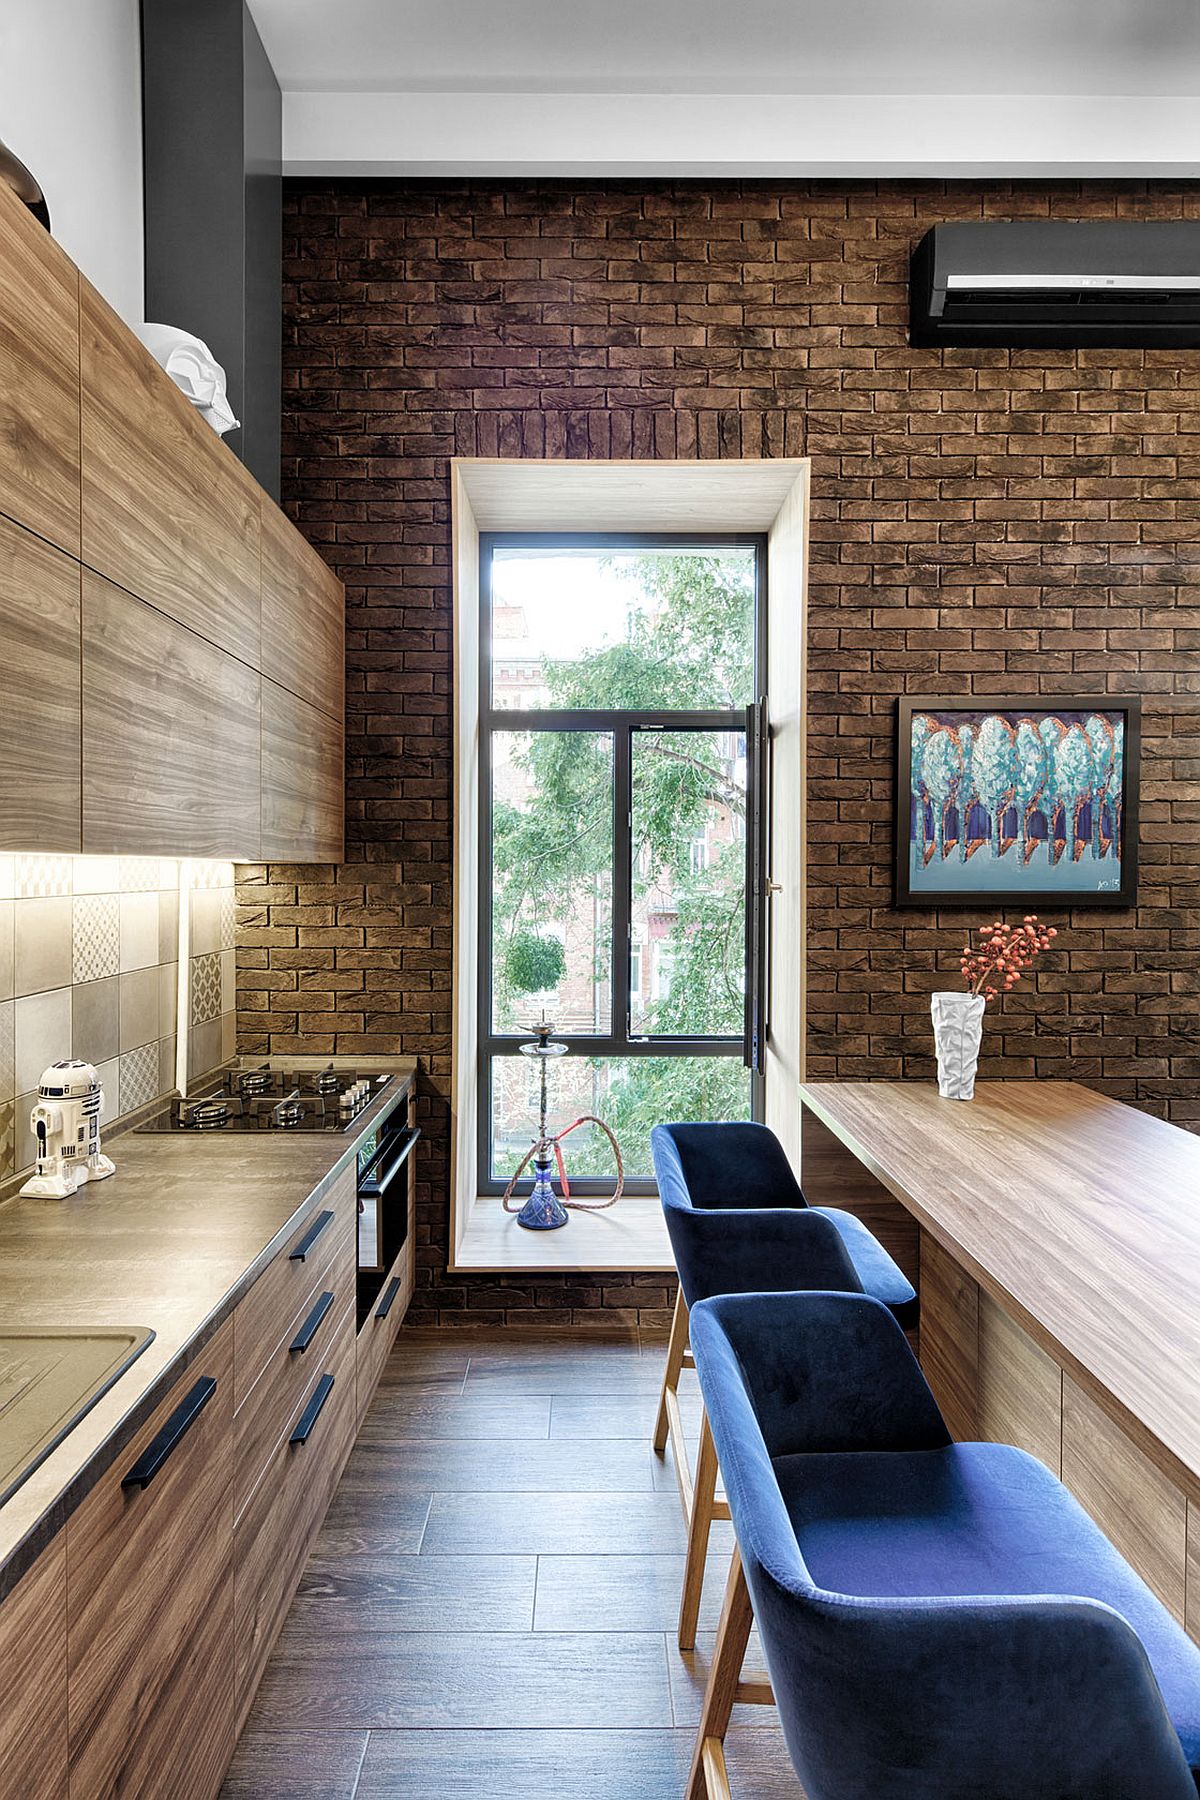 Kitchen-neatly-tucked-behind-the-living-room-and-dining-space-inside-tiny-apartment-with-brick-walls